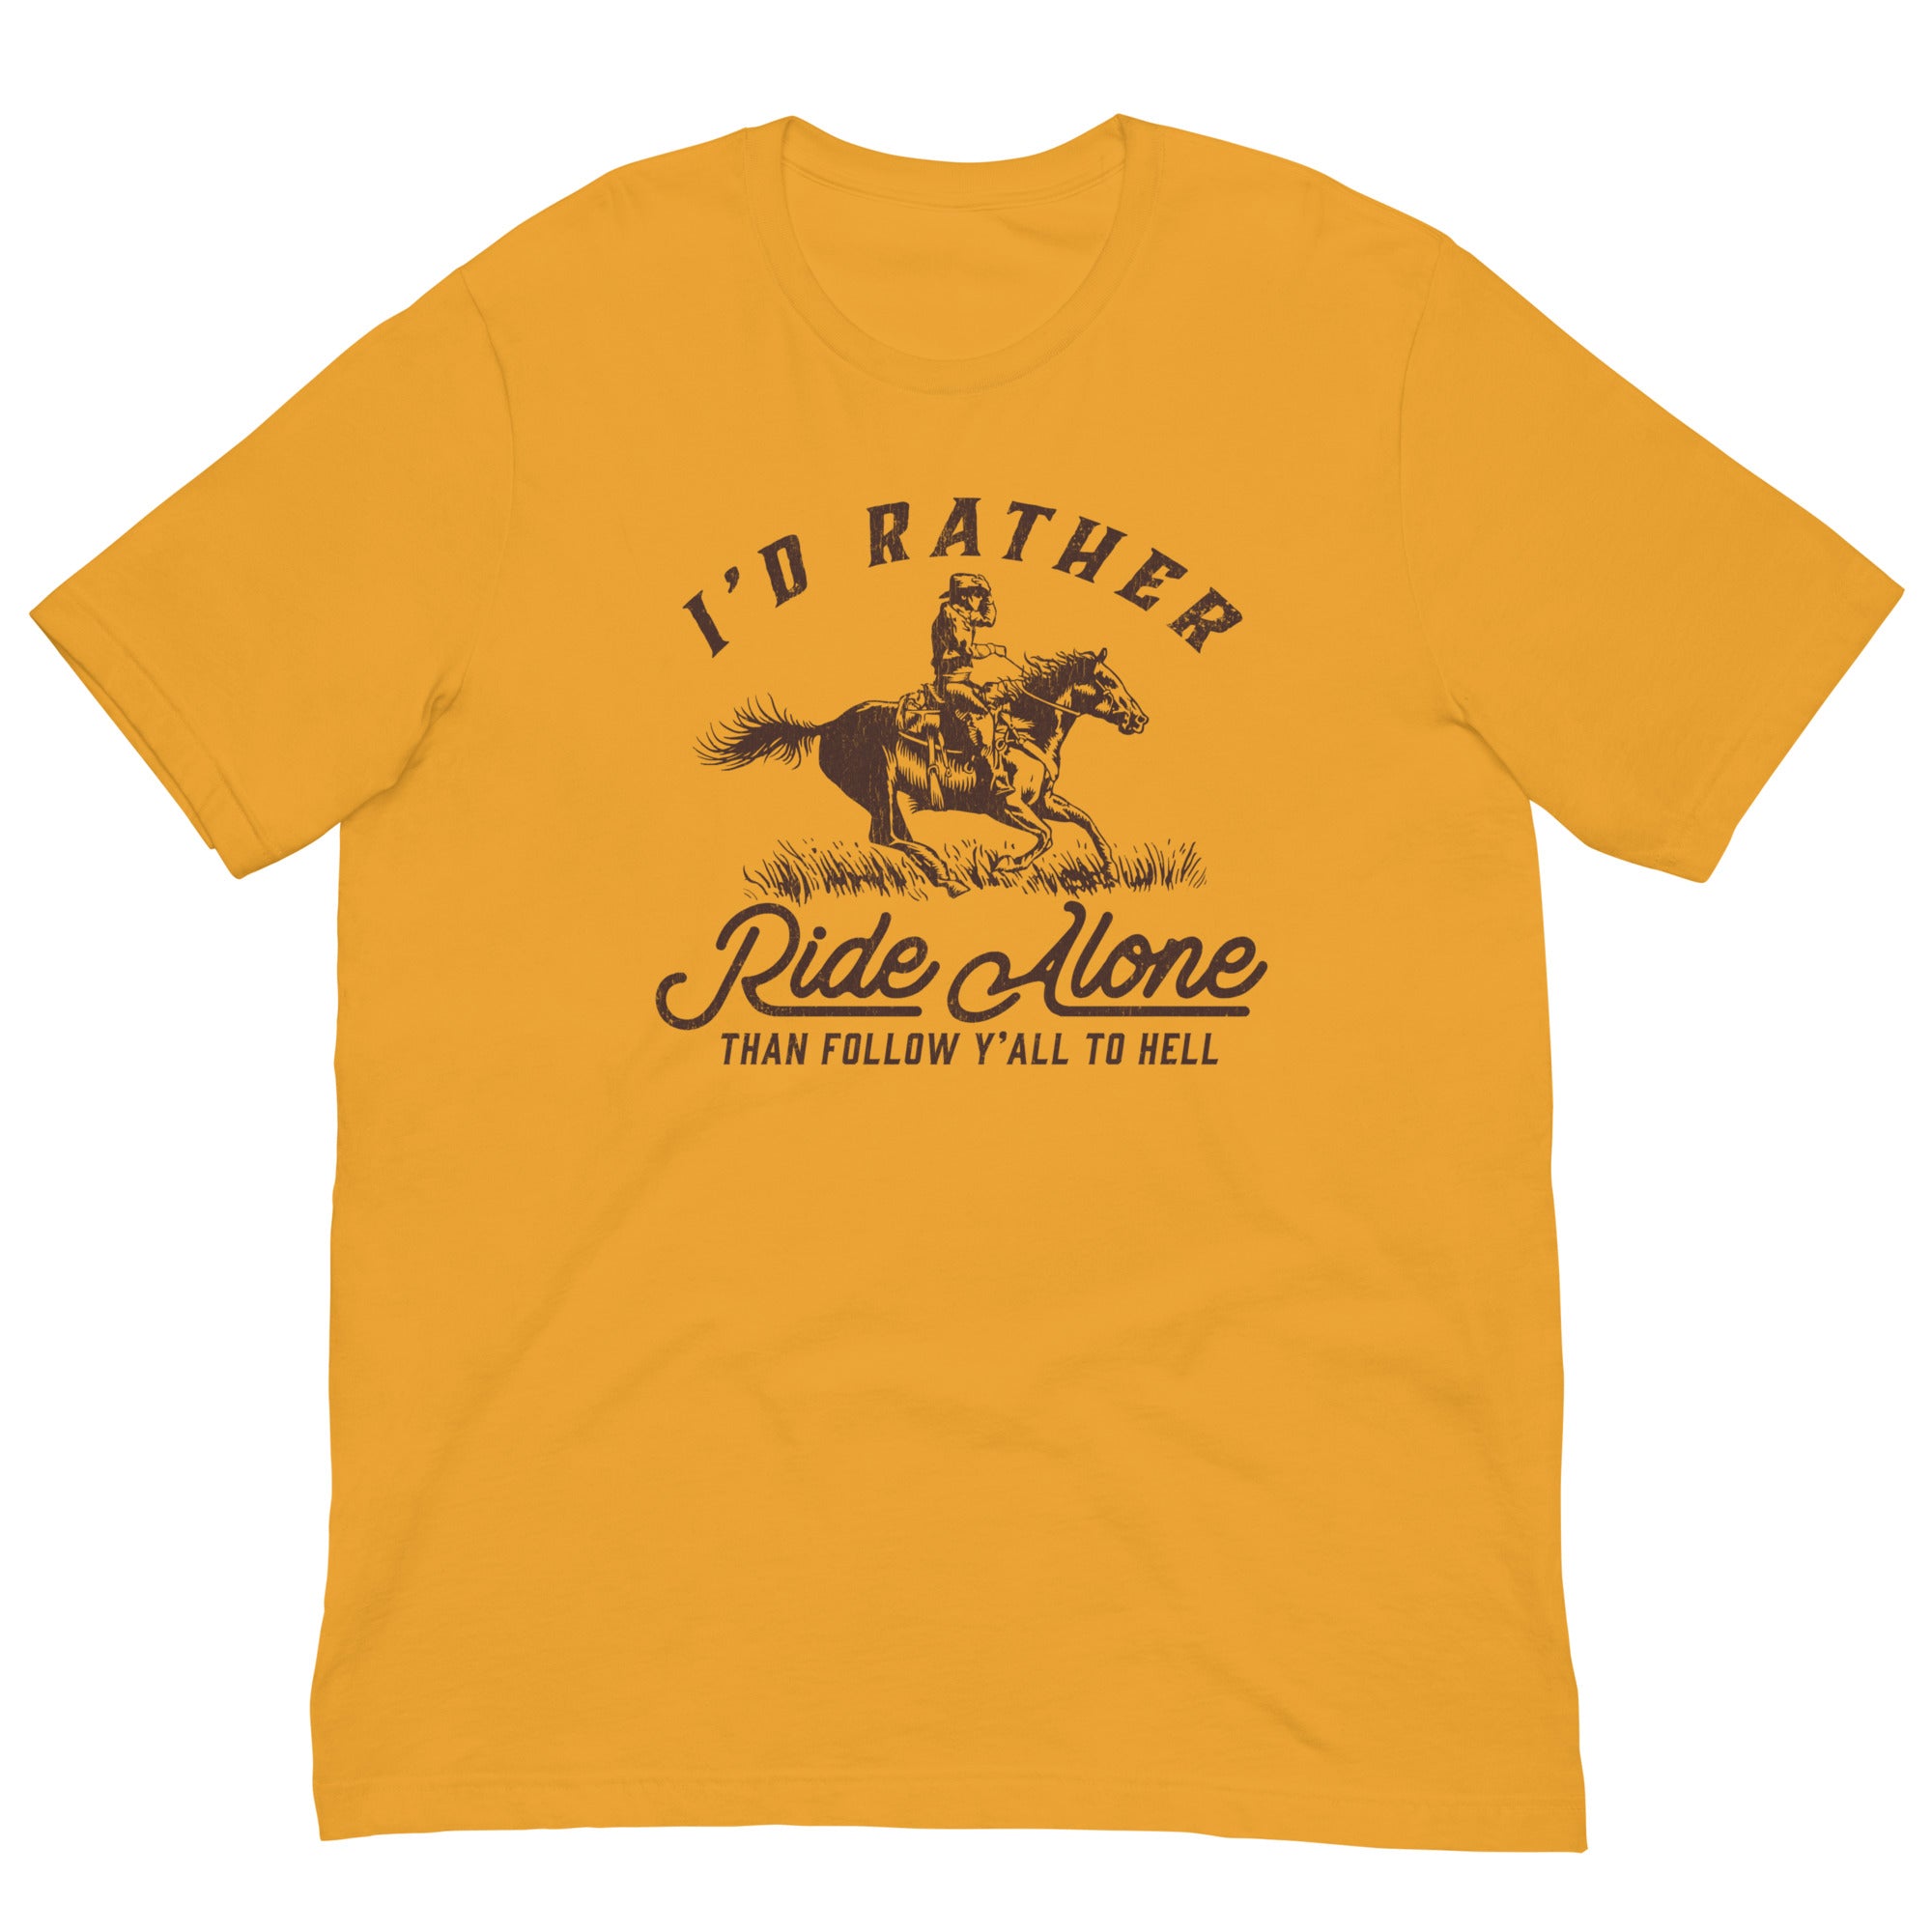 I'd Rather Ride Alone Than Follow Y-All to Hell Shirt